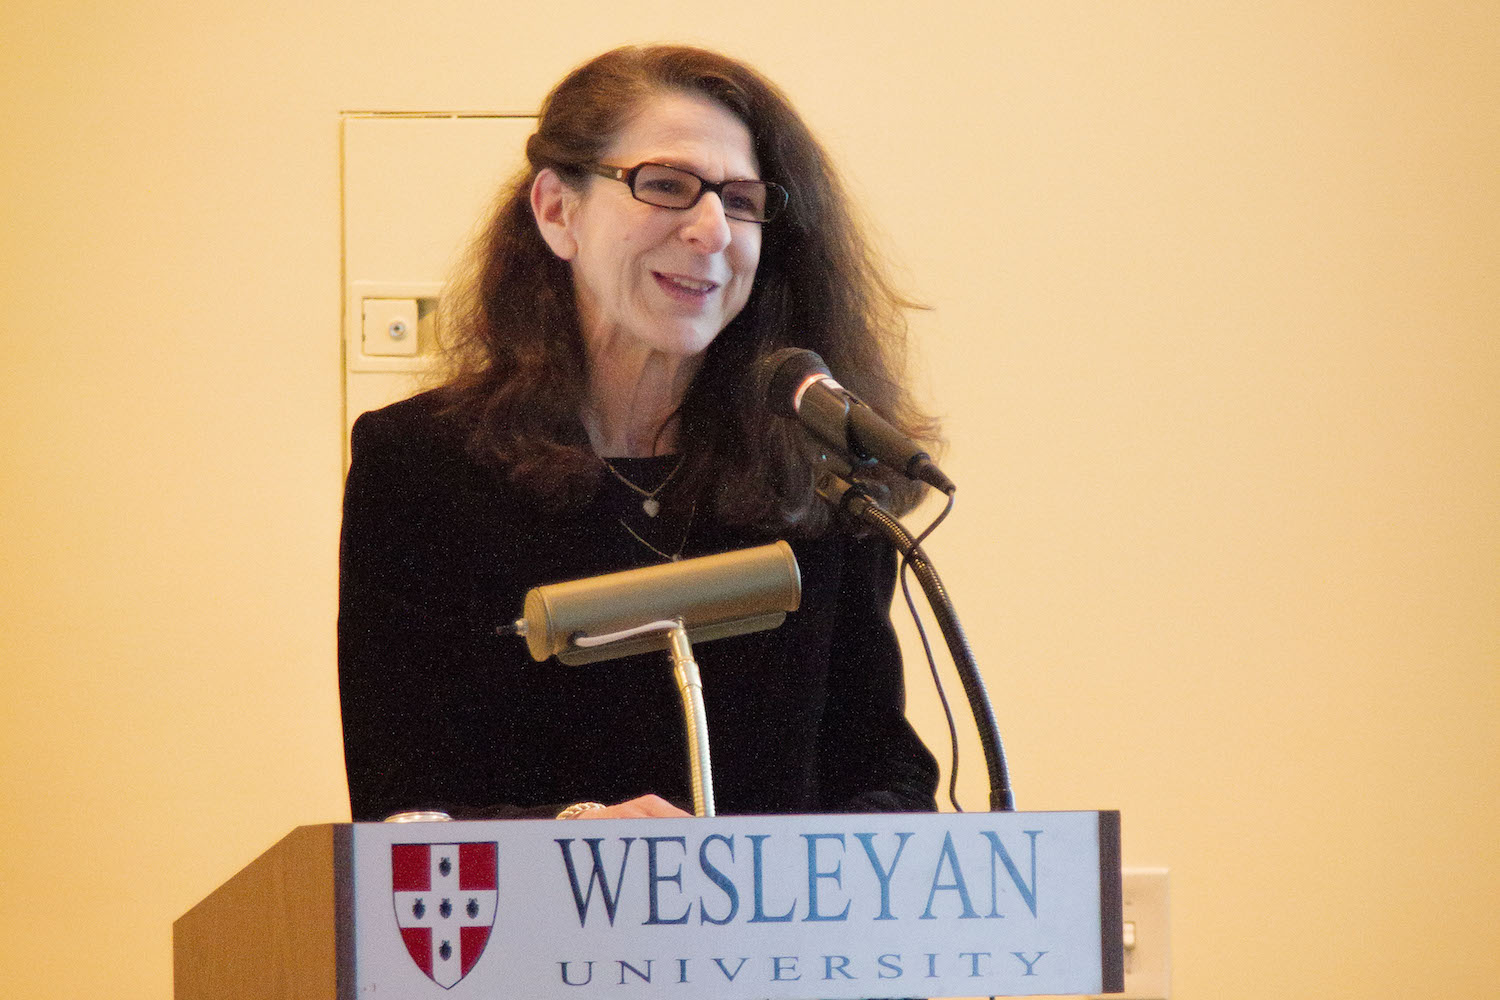 Anne Greene, director of the Wesleyan Writers Conference, University Professor of English, introduced Koeppel, a former writer, editor, and producer at CBS News, who is the author of "City On A Grid: How New York Became New York" (2015). Koeppel has helped Wesleyan establish the Koeppel journalism courses, which bring distinguished journalists to campus each semester to work closely with students. Koeppel's talk was hosted by the Writing Certificate Program and Distinguished Writers Series. A book signing followed the talk.